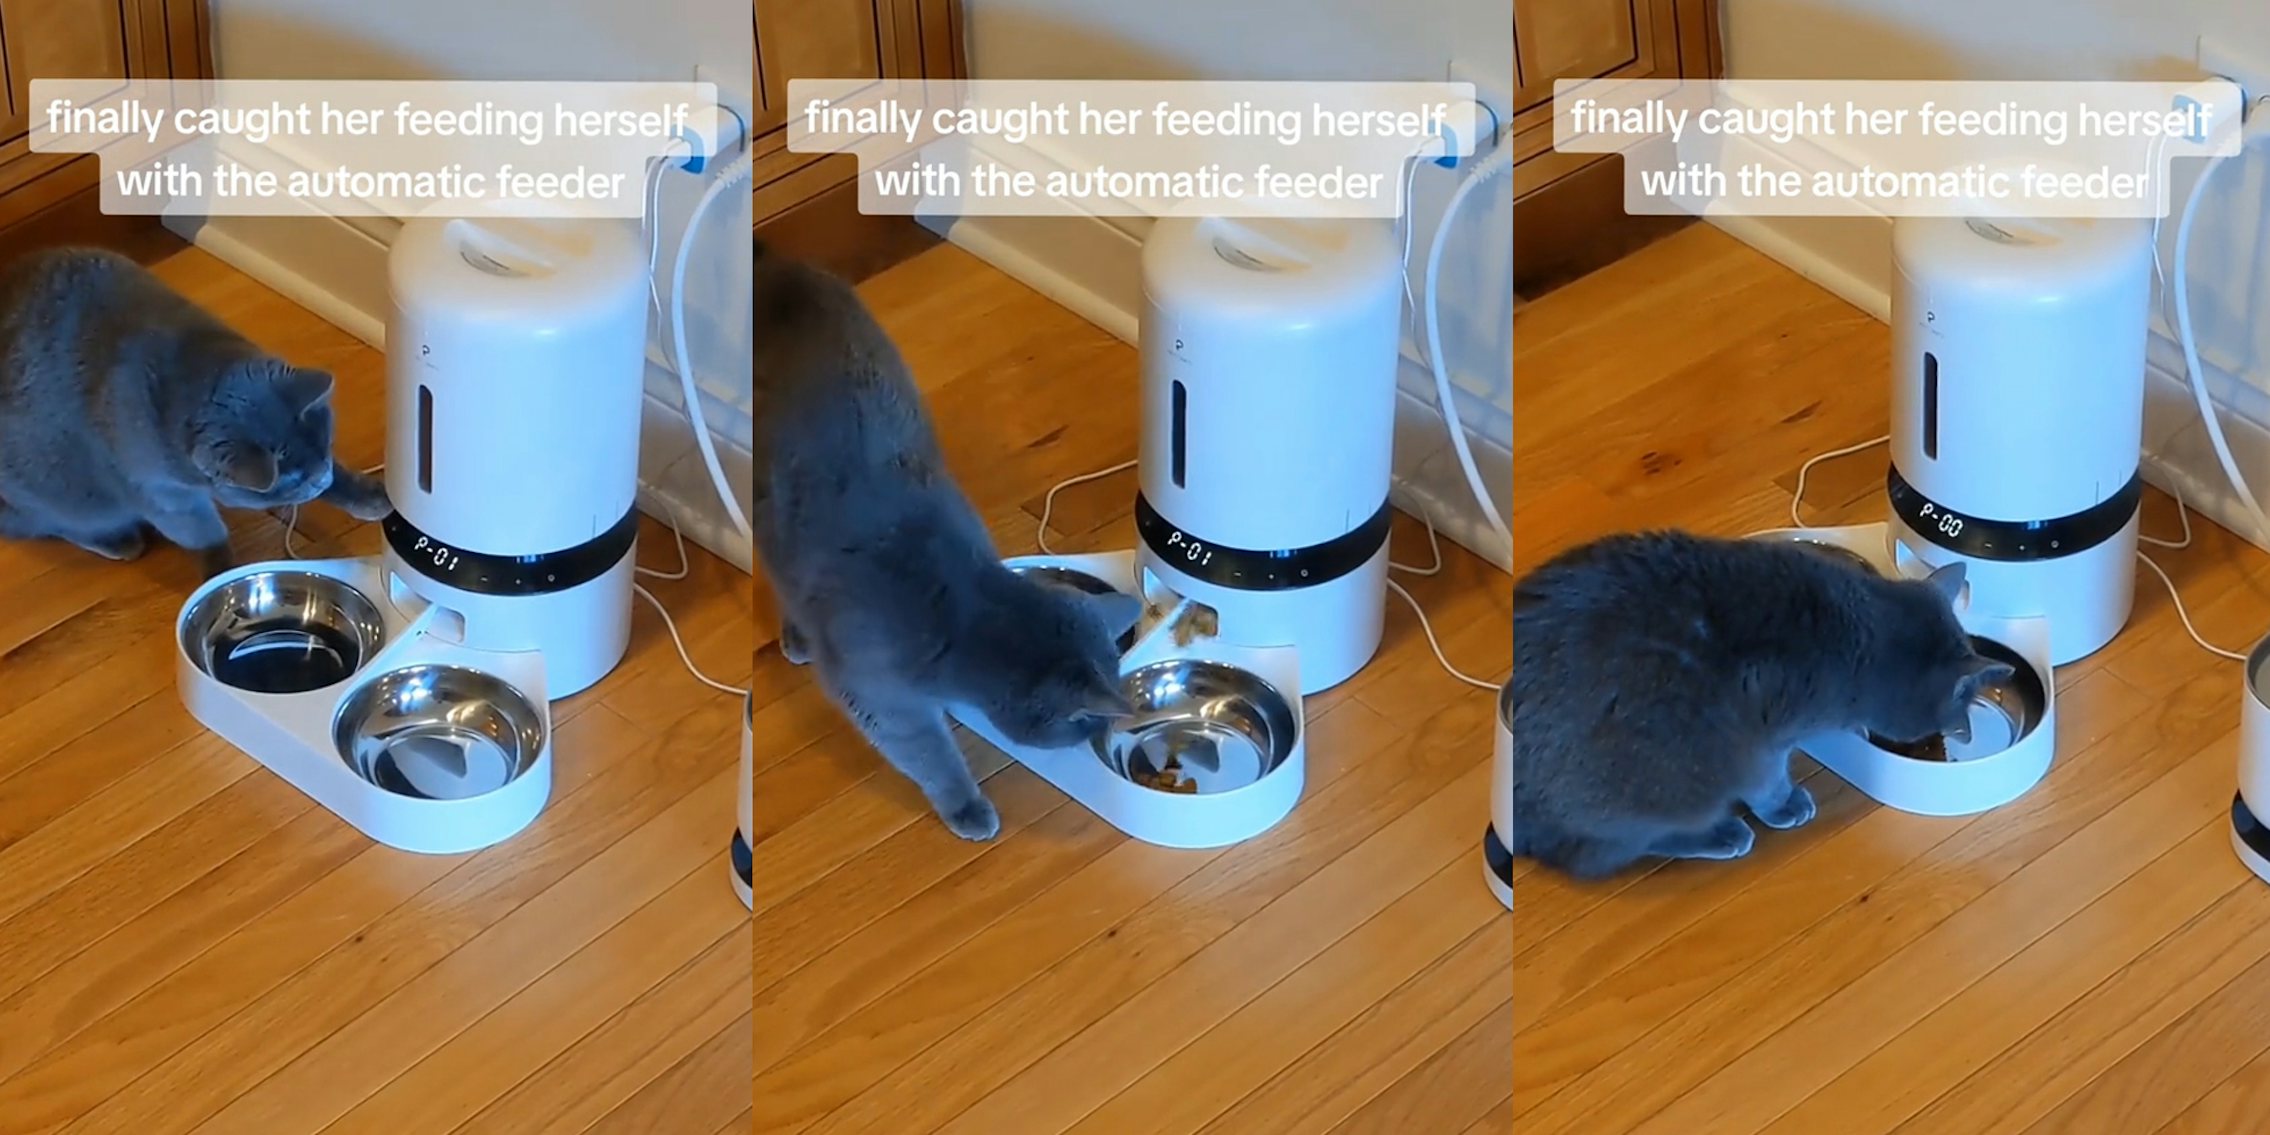 cat using automatic feeder with caption 'finally caught her feeding herself with the automatic feeder' (l) cat using automatic feeder with caption 'finally caught her feeding herself with the automatic feeder' (c) cat using automatic feeder with caption 'finally caught her feeding herself with the automatic feeder' (r)